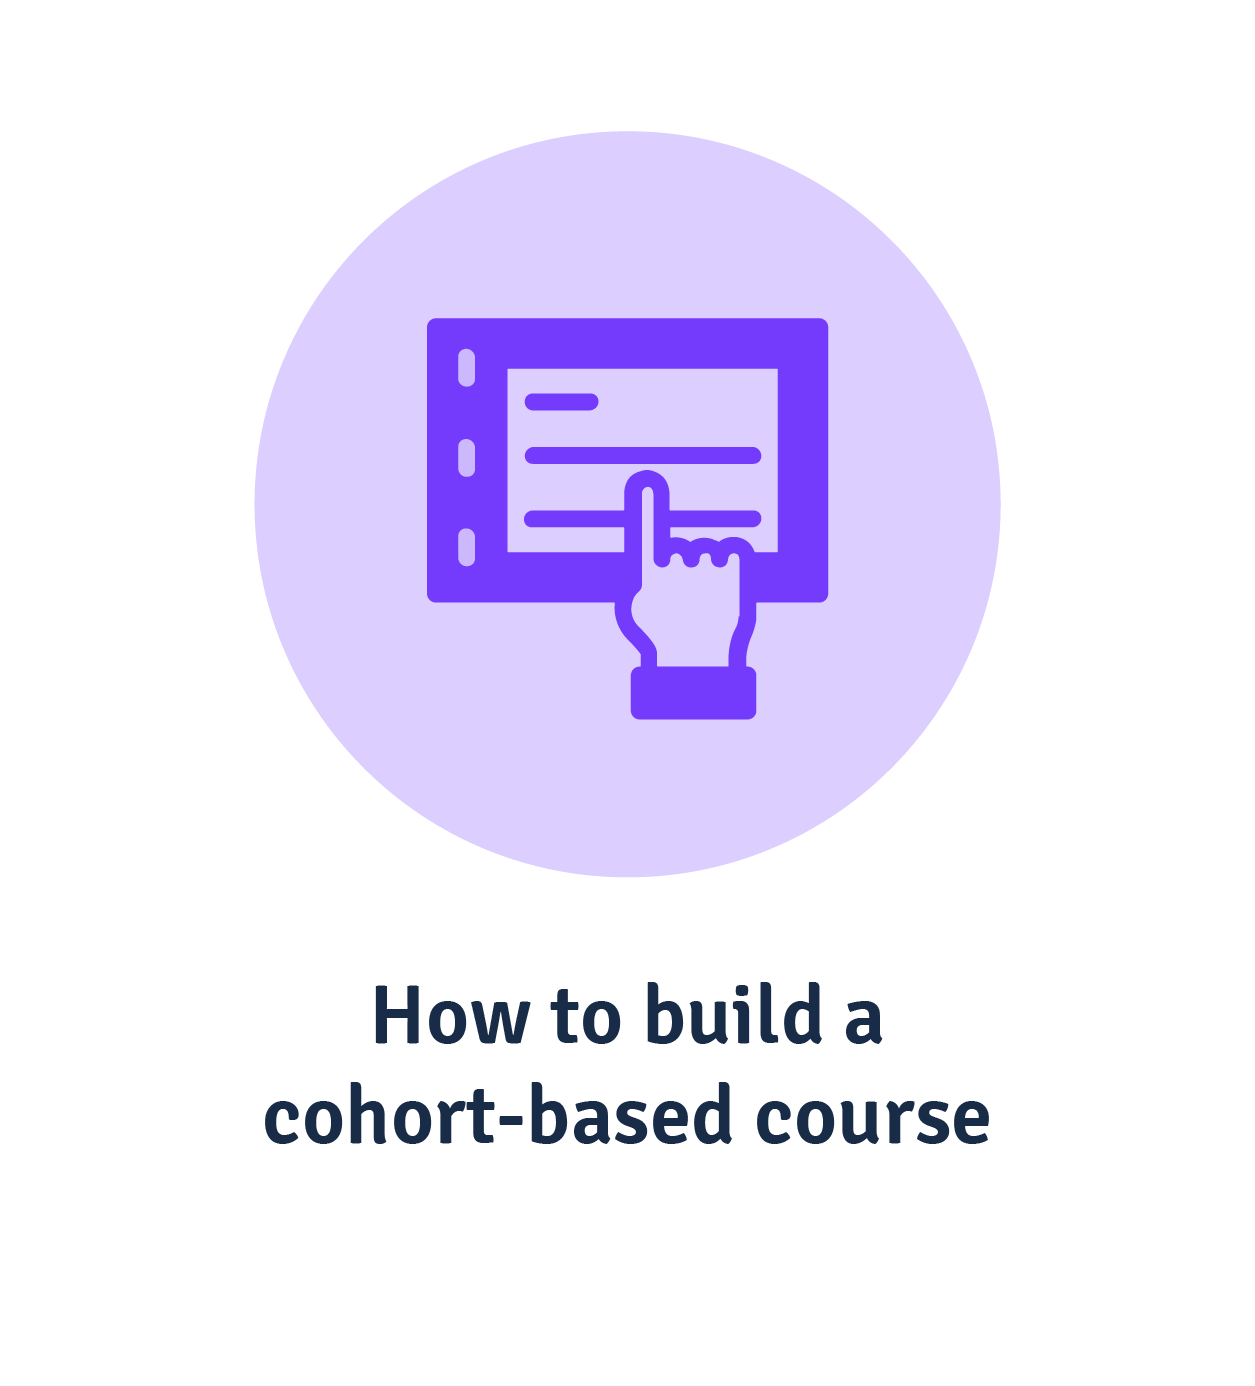 How to build a cohort-based course?